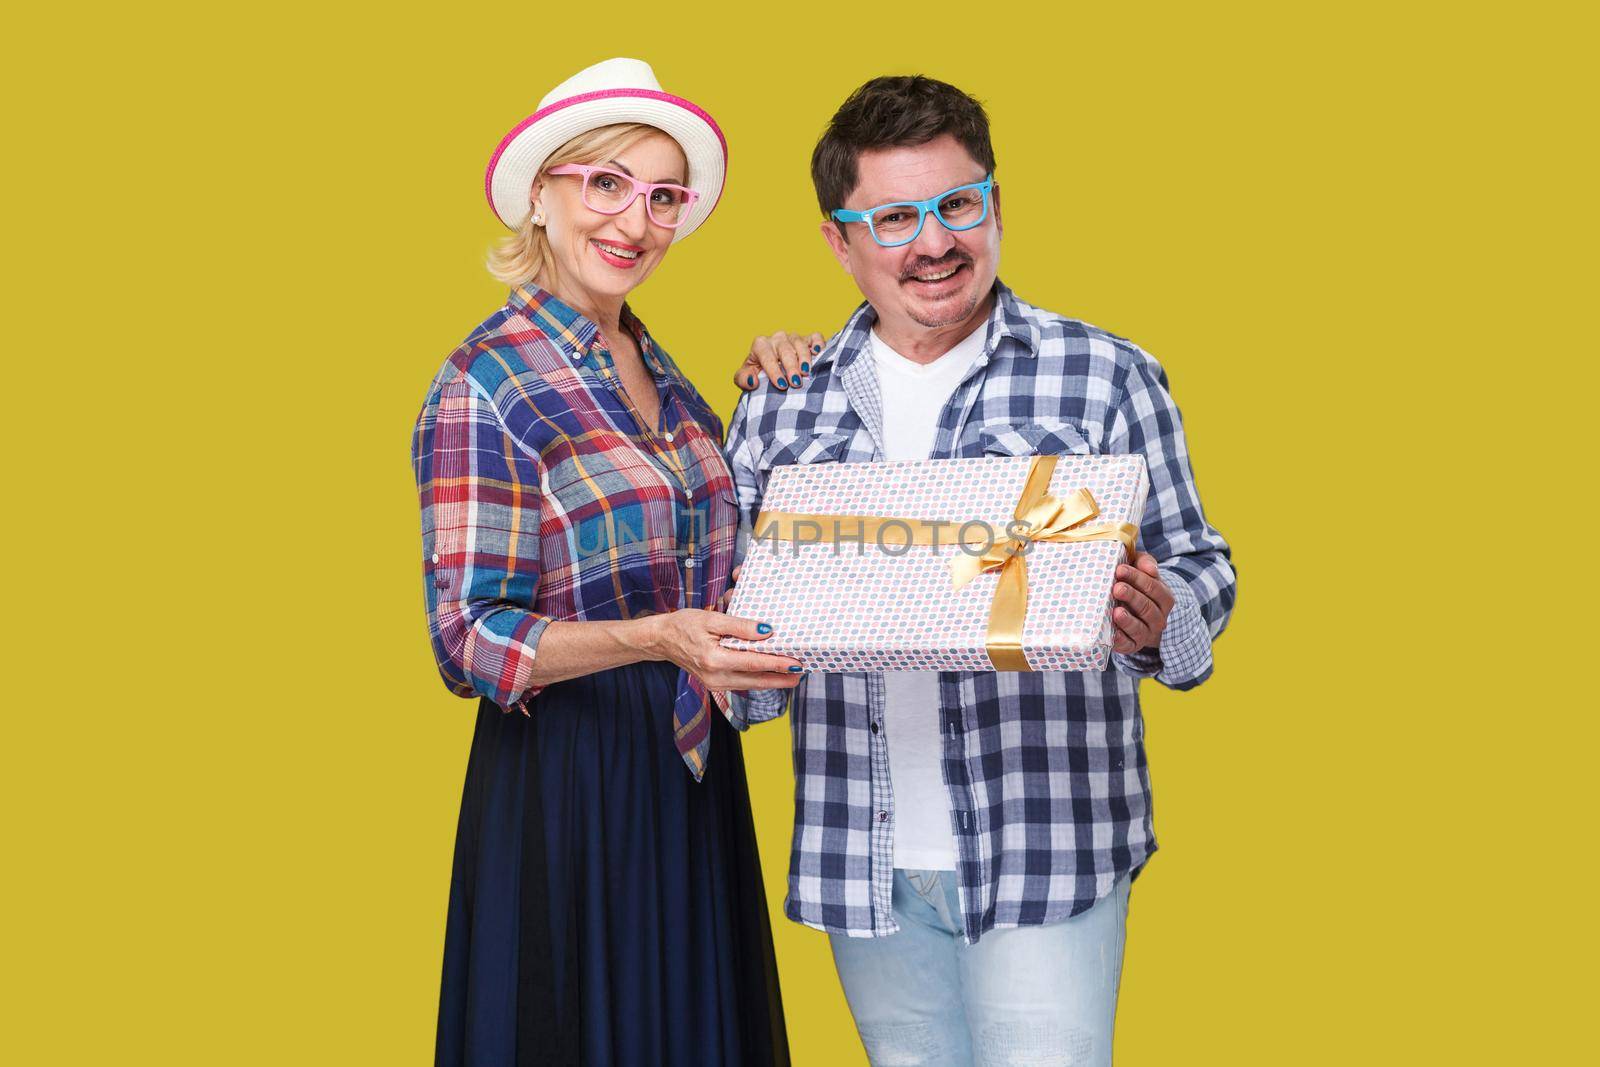 Couple of positive friends, adult man and woman in casual checkered shirt standing beside together holding present gift box, toothy smile and looking. Indoor, isolated, studio shot, yellow background